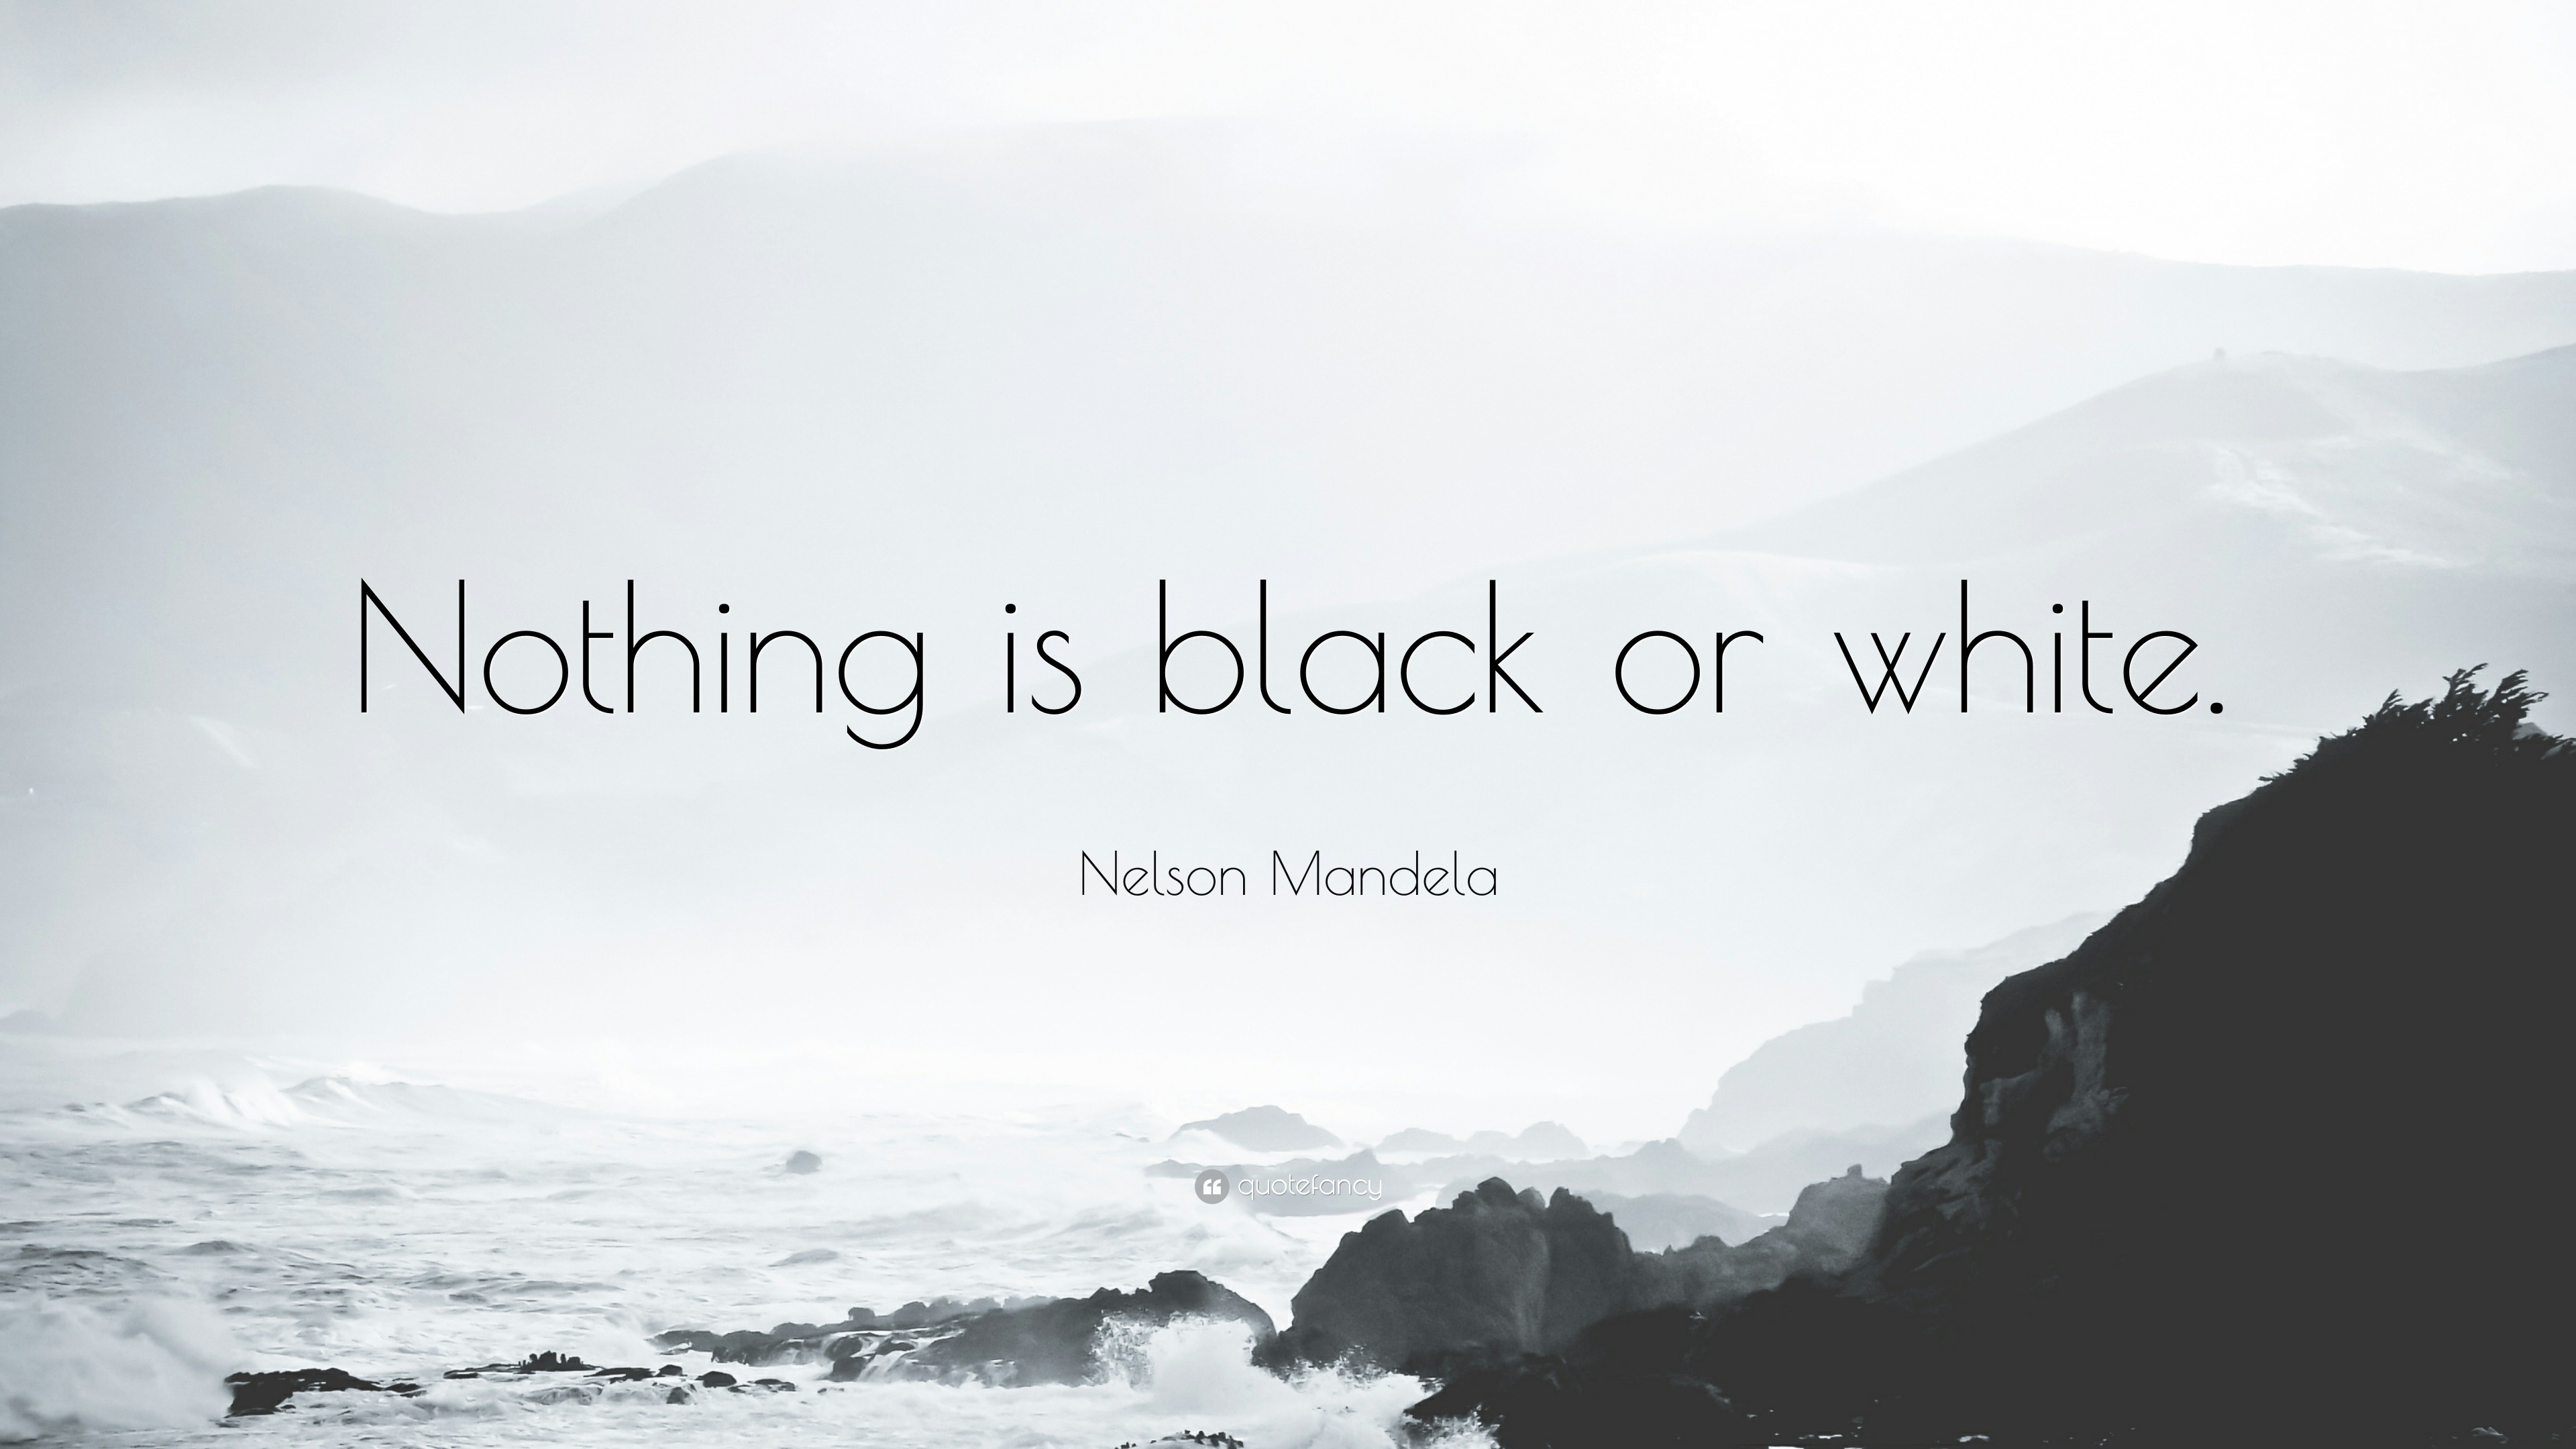 Nelson Mandela Quote: “Nothing is black or white.”